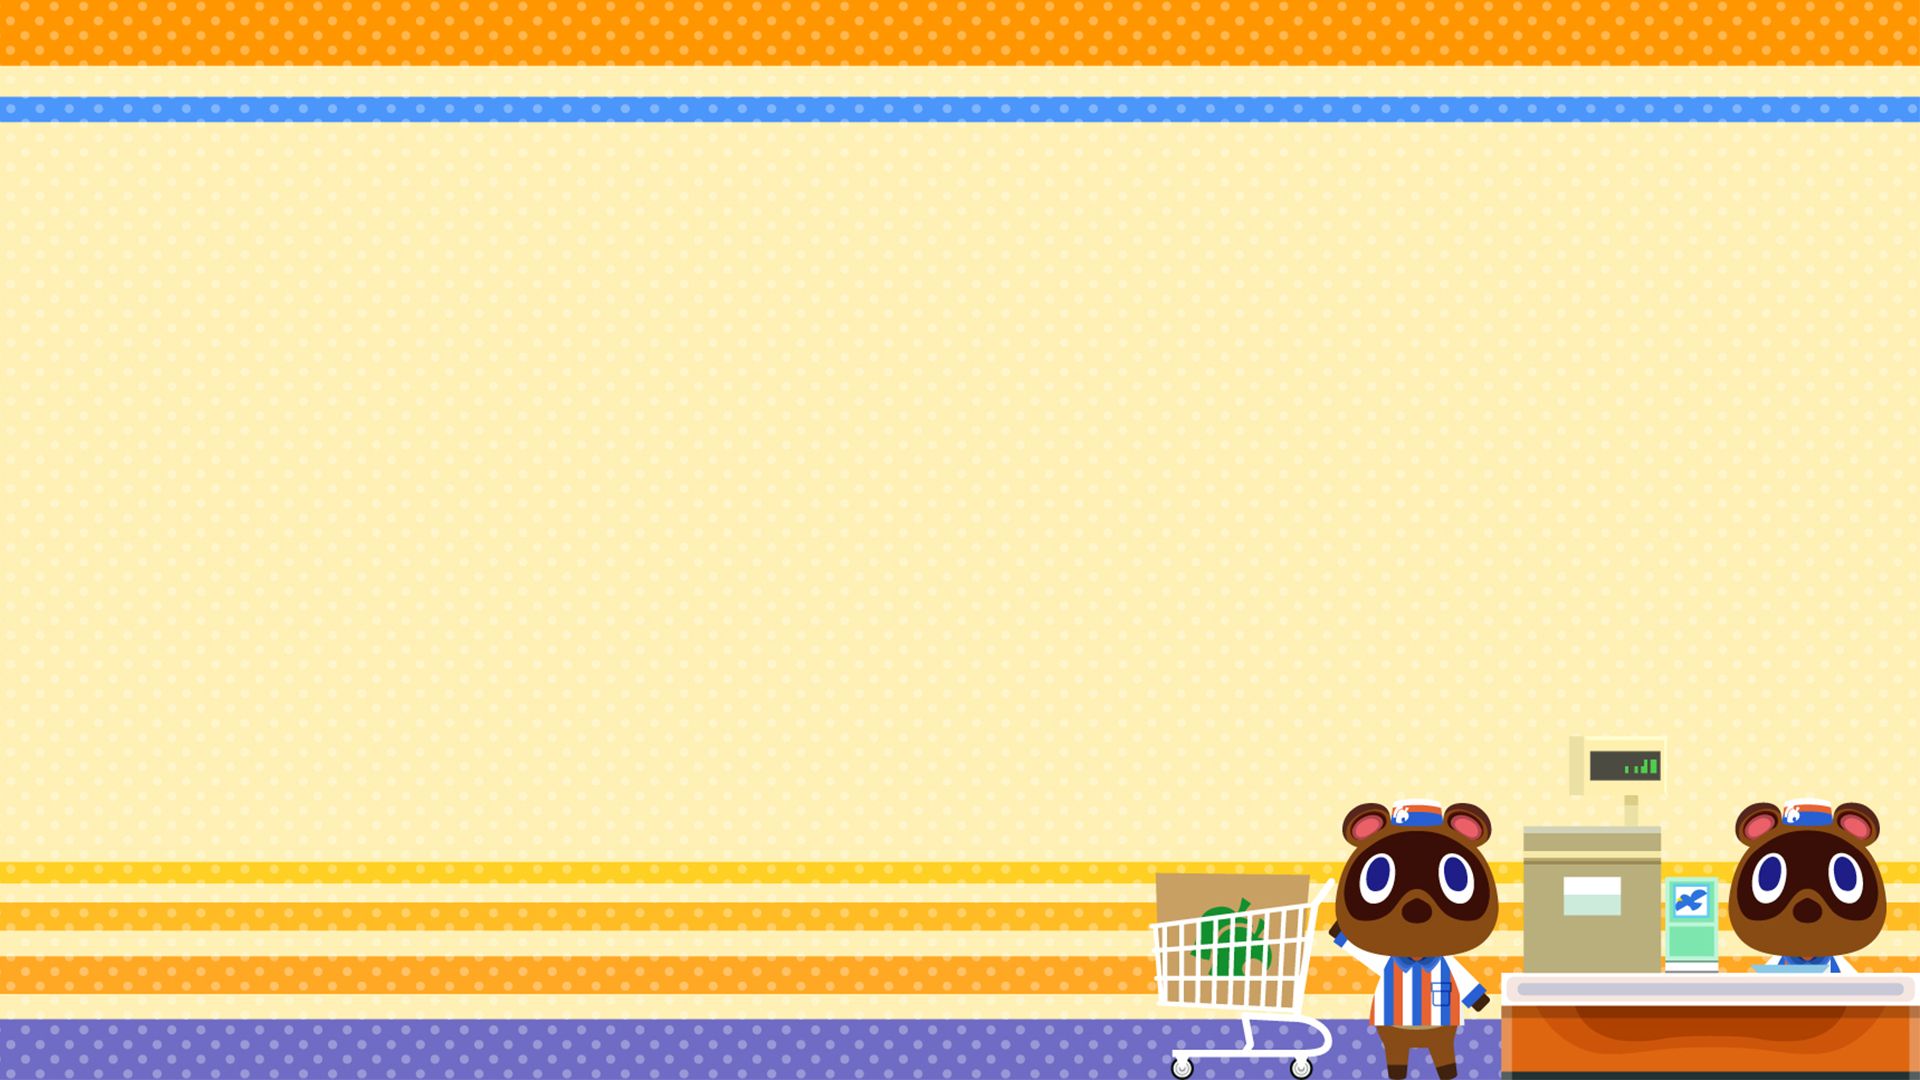 Video Game Animal Crossing: New Leaf HD Wallpaper | Background Image